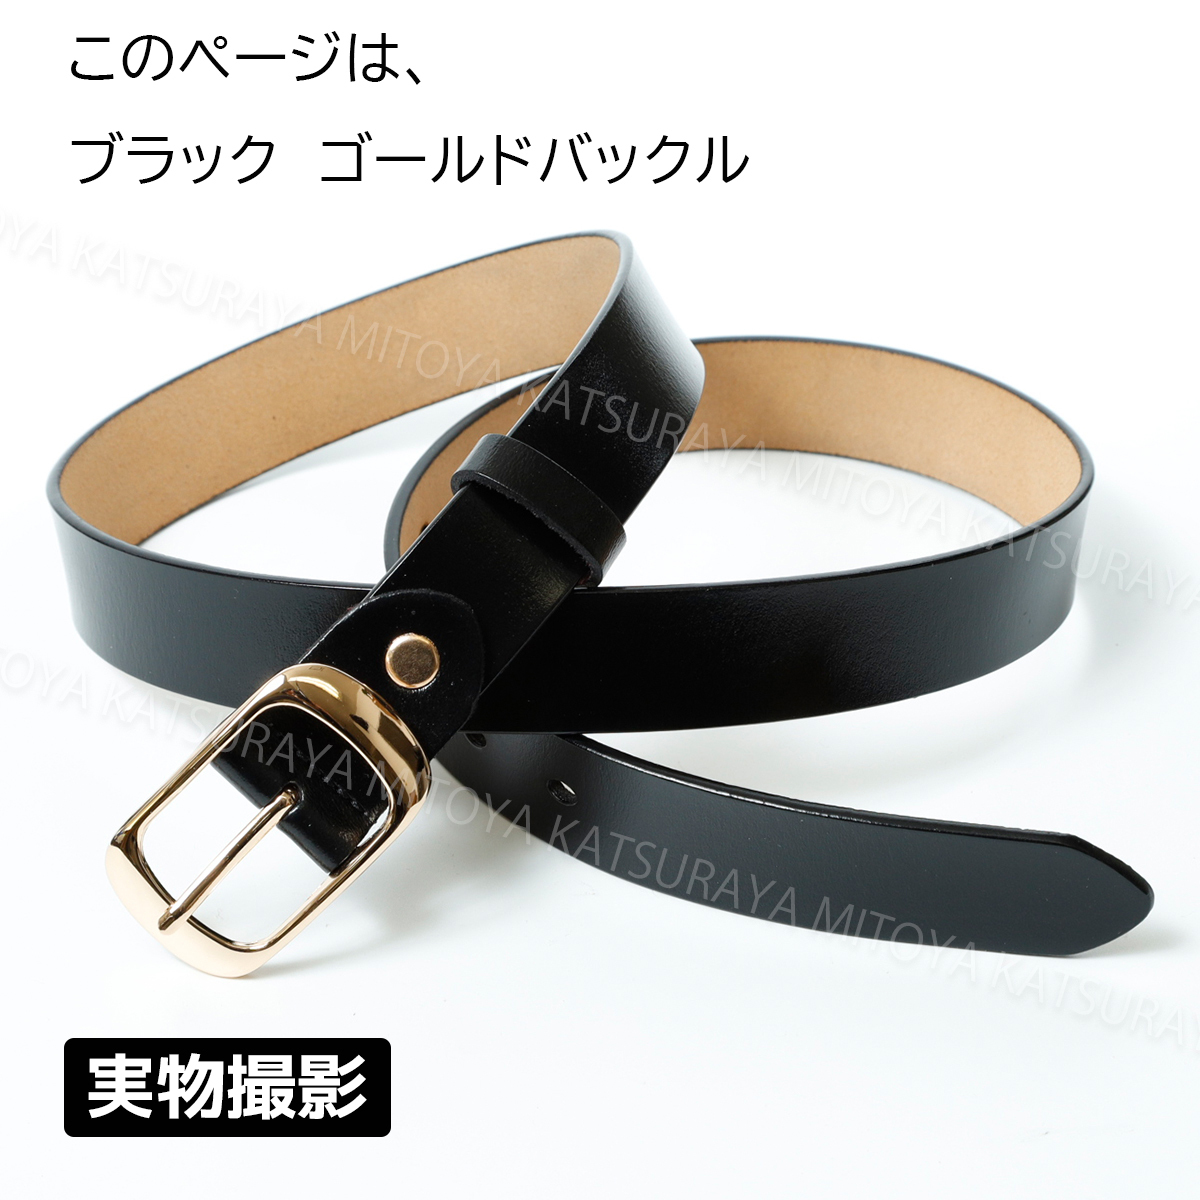  original leather lady's belt black black Gold buckle cow leather leather casual simple Smart business Golf suit futoshi .